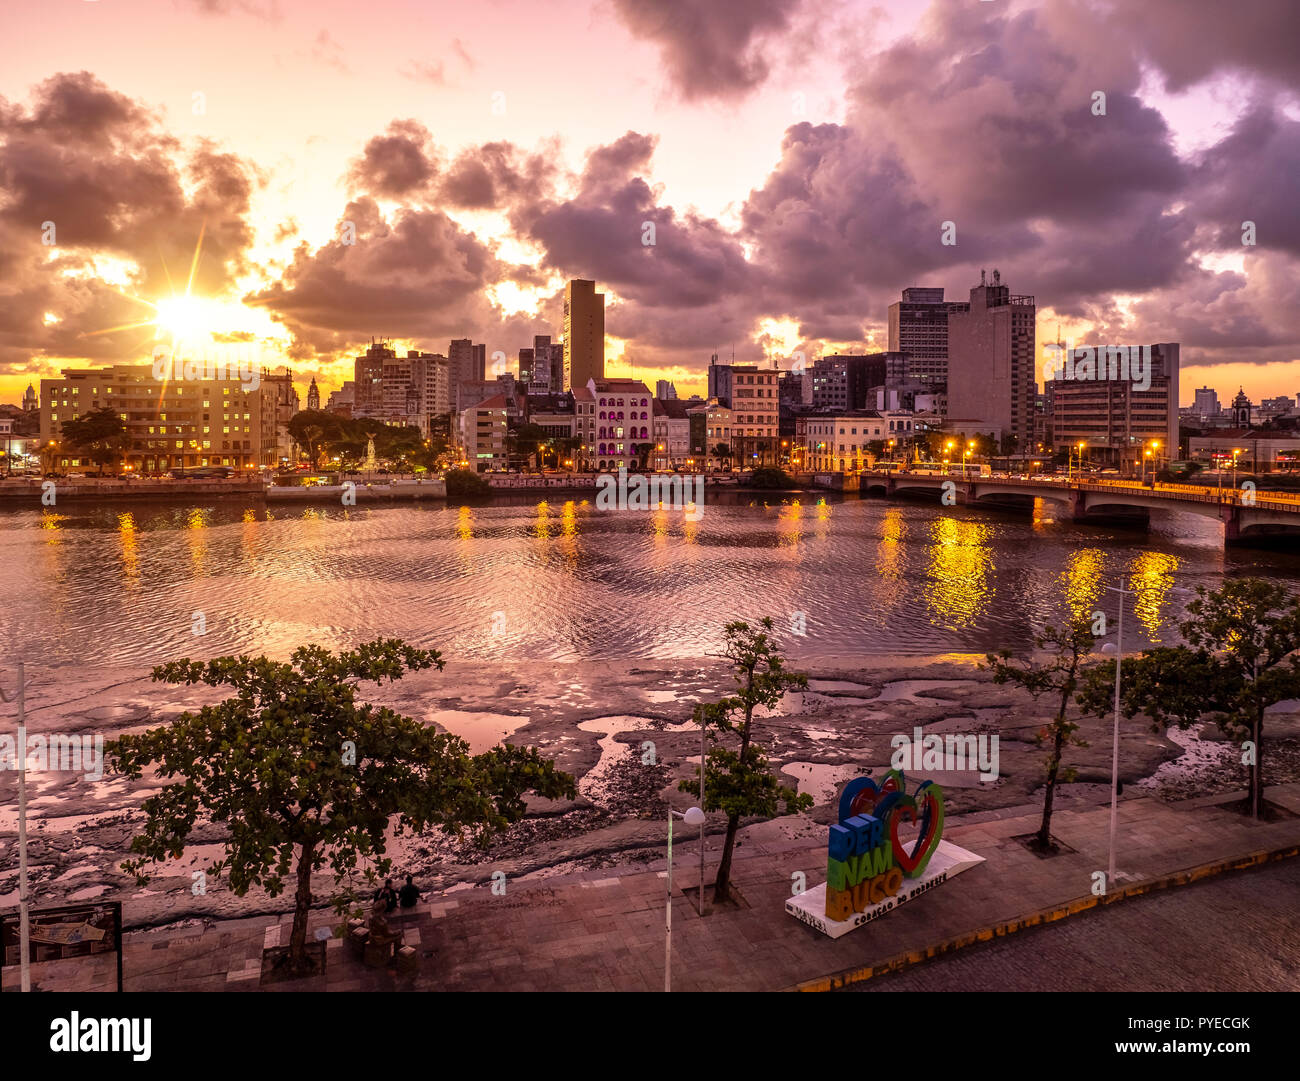 Recife in Pernambuco, Brazil by the Capibaribe river with colonial buildings and sunset. Stock Photo